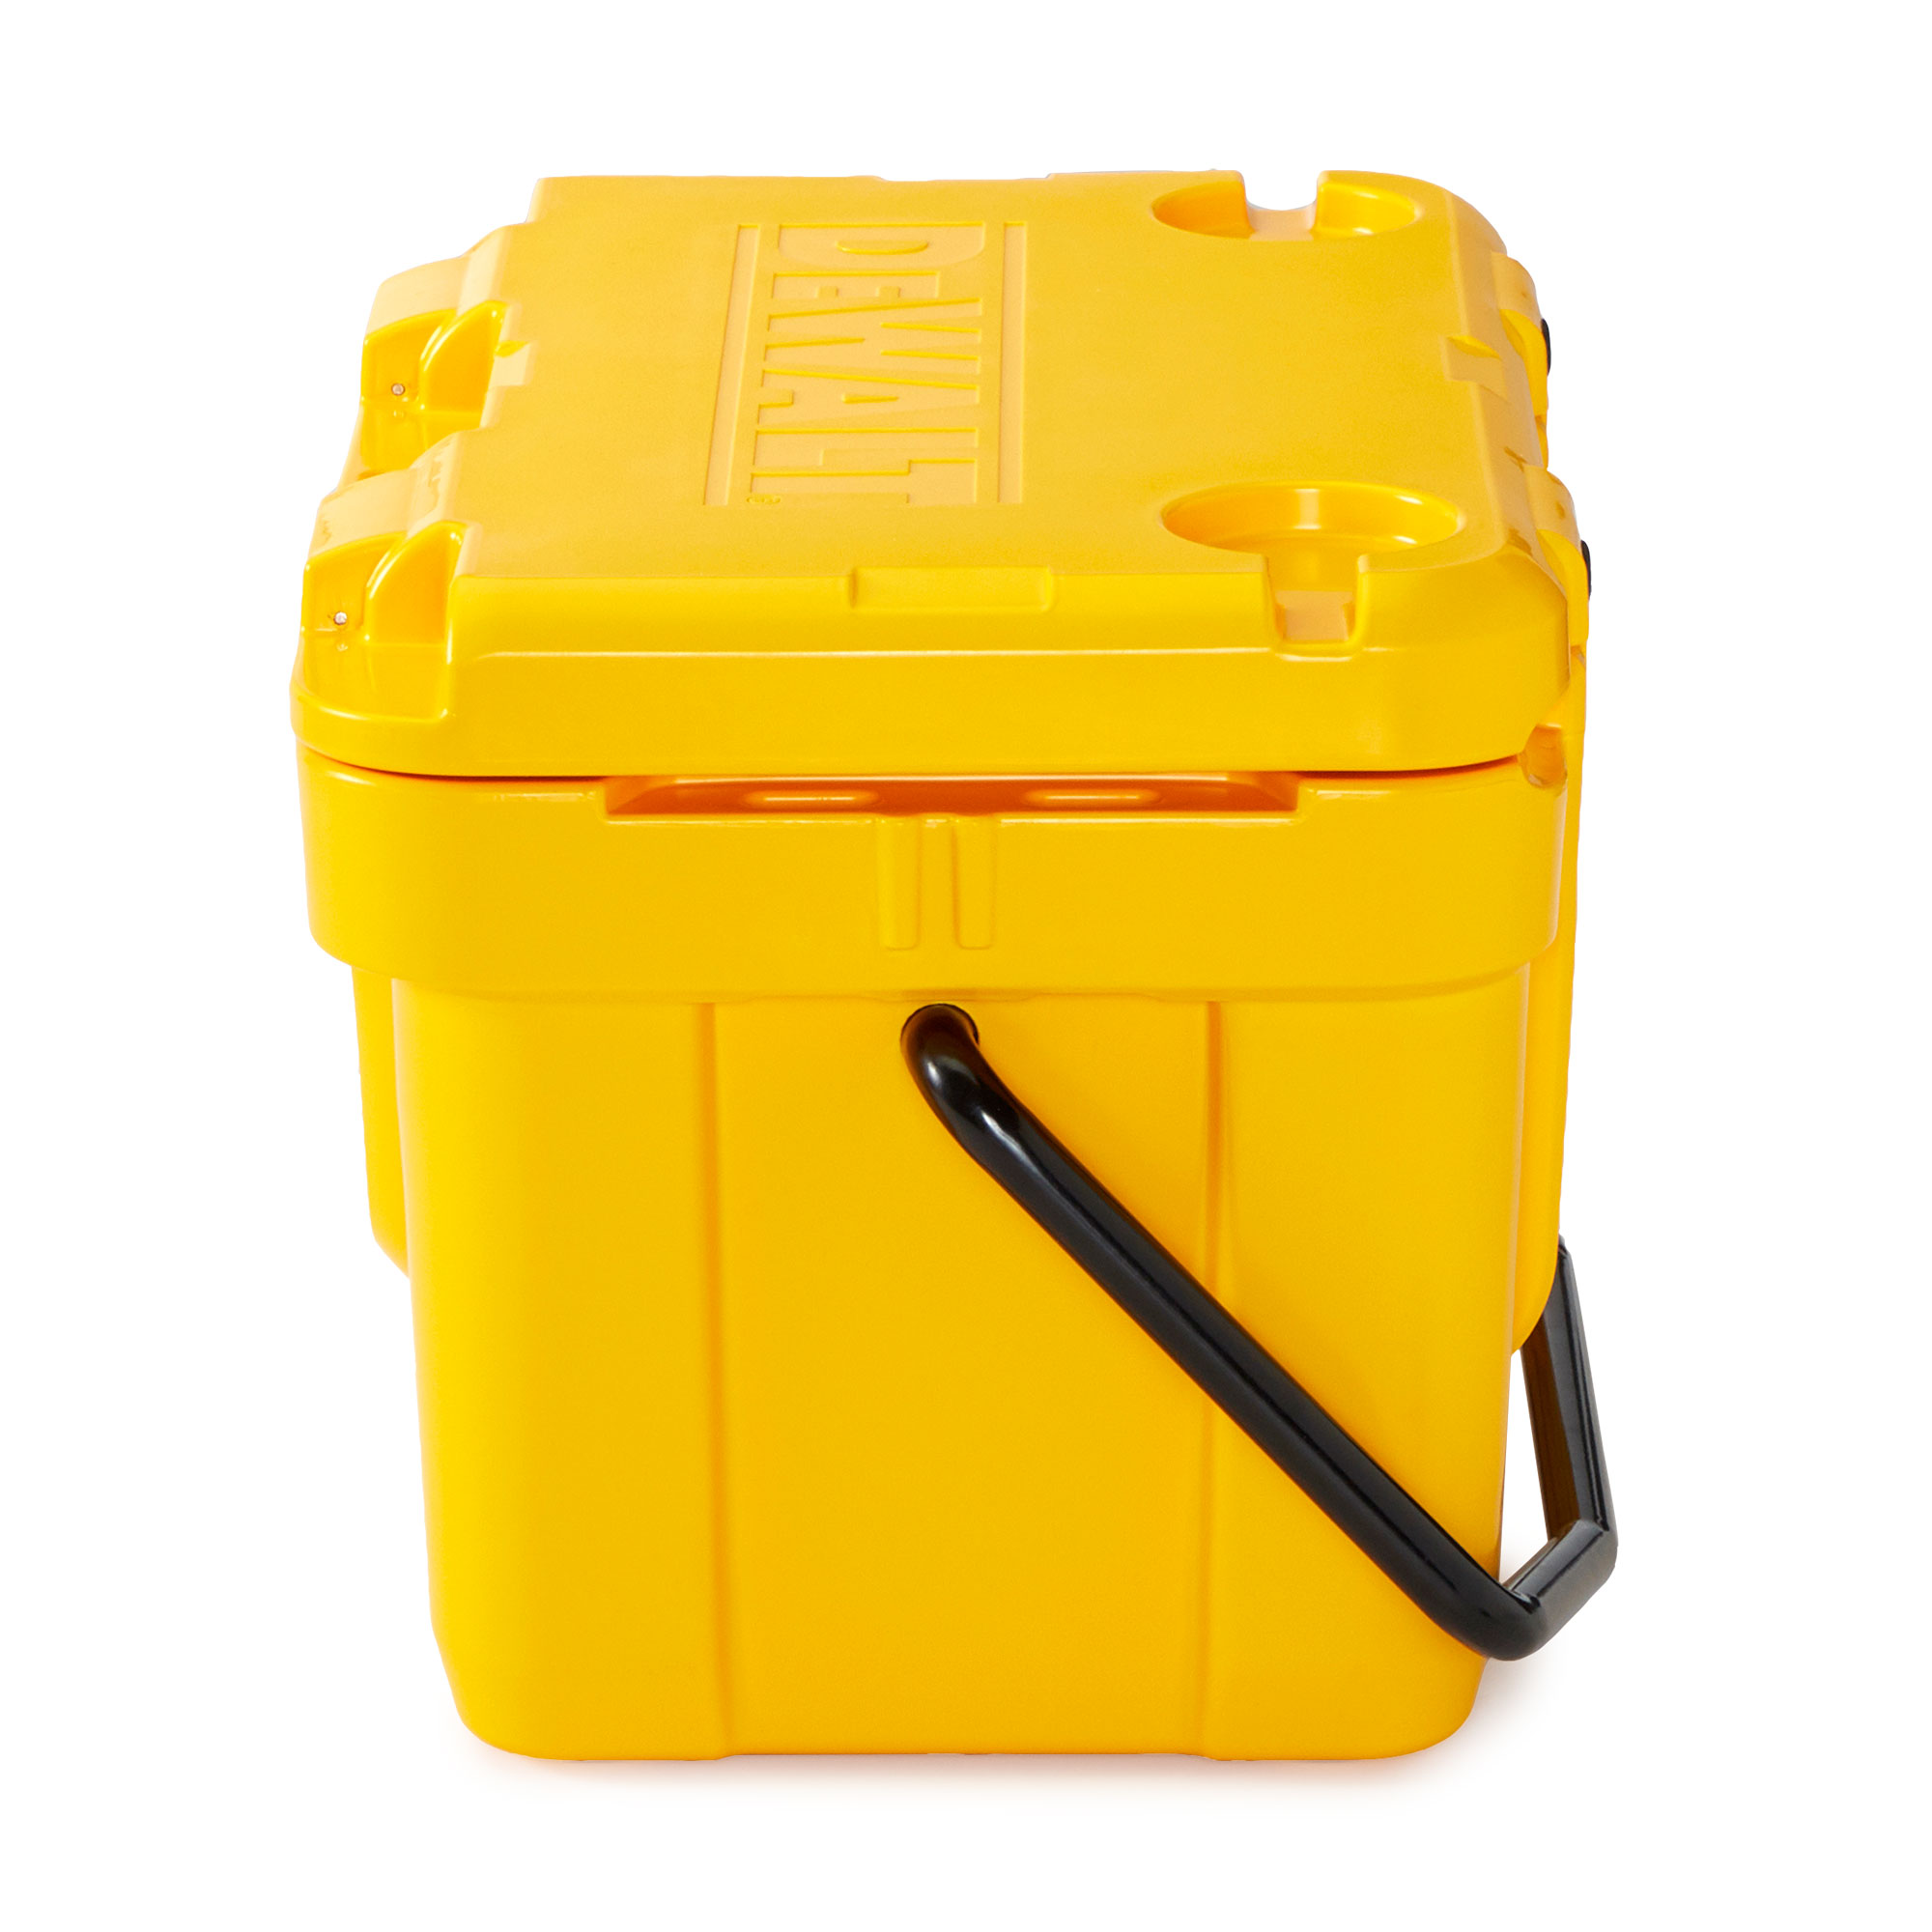 DeWalt 25 Quart Roto Molded Insulated Lunch Box Portable Drink Cooler, Yellow - image 3 of 7